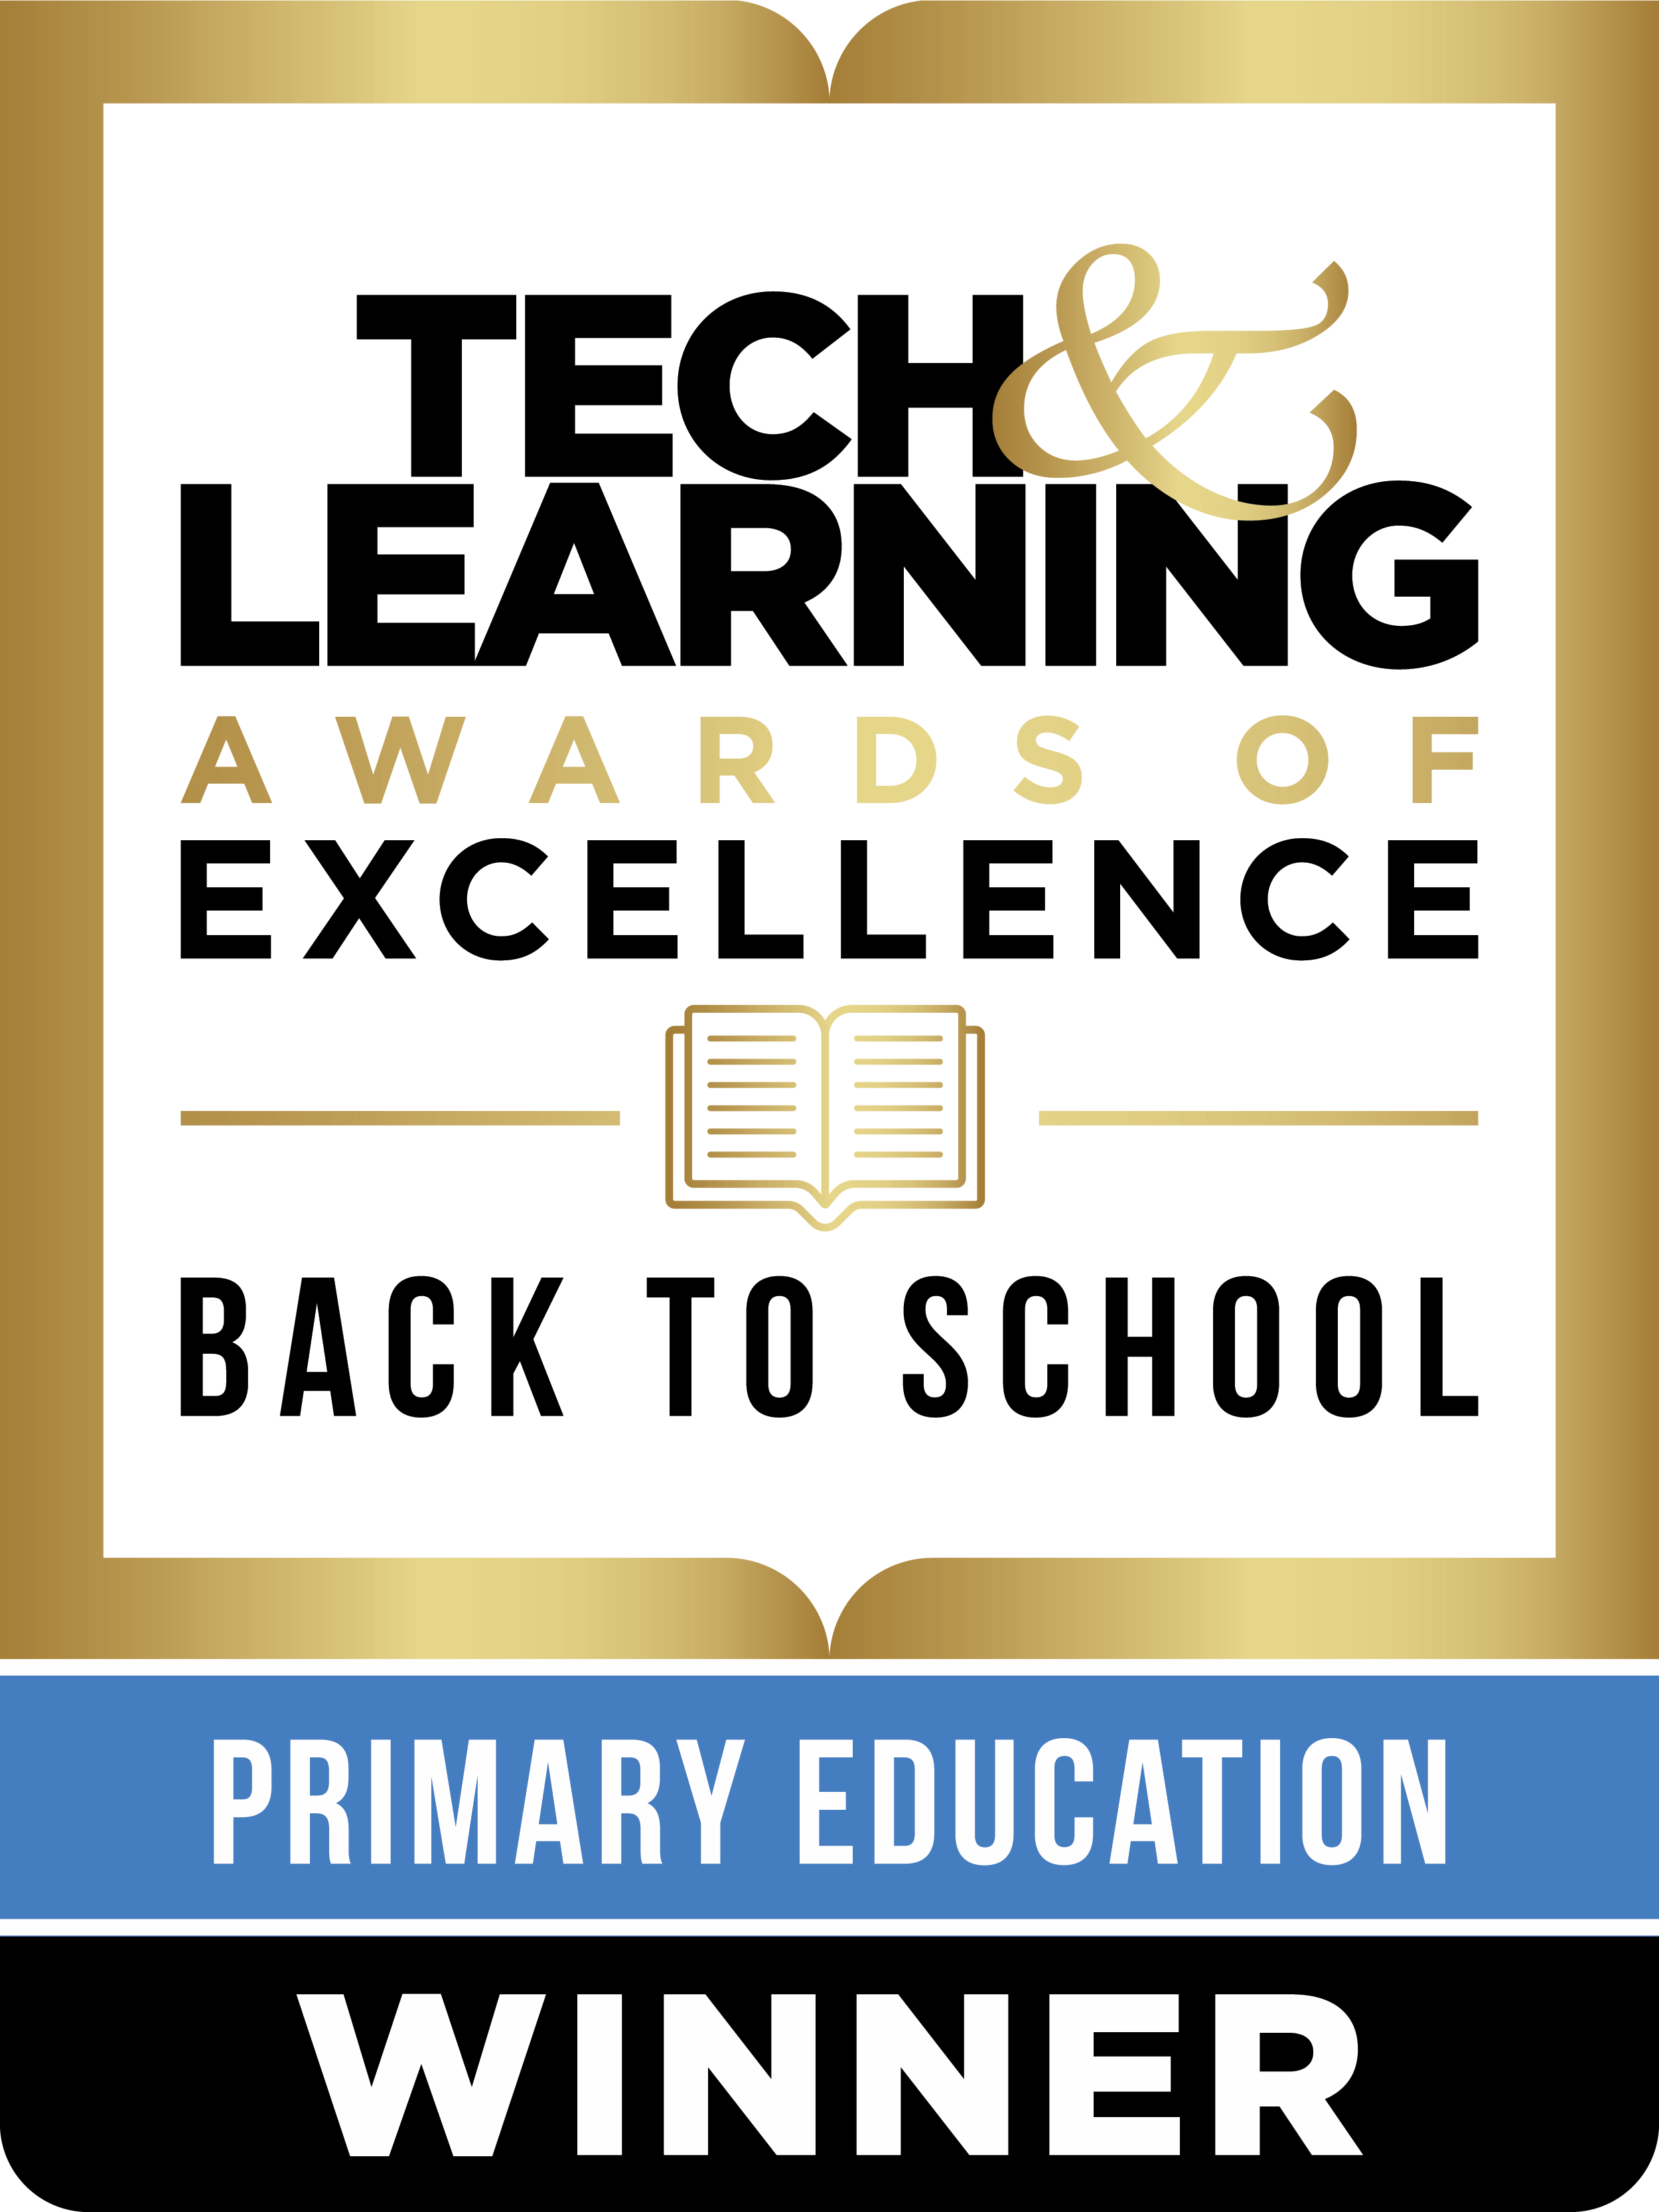 Tech & Learning Awards of Excellence <br>Back to School - Primary Education